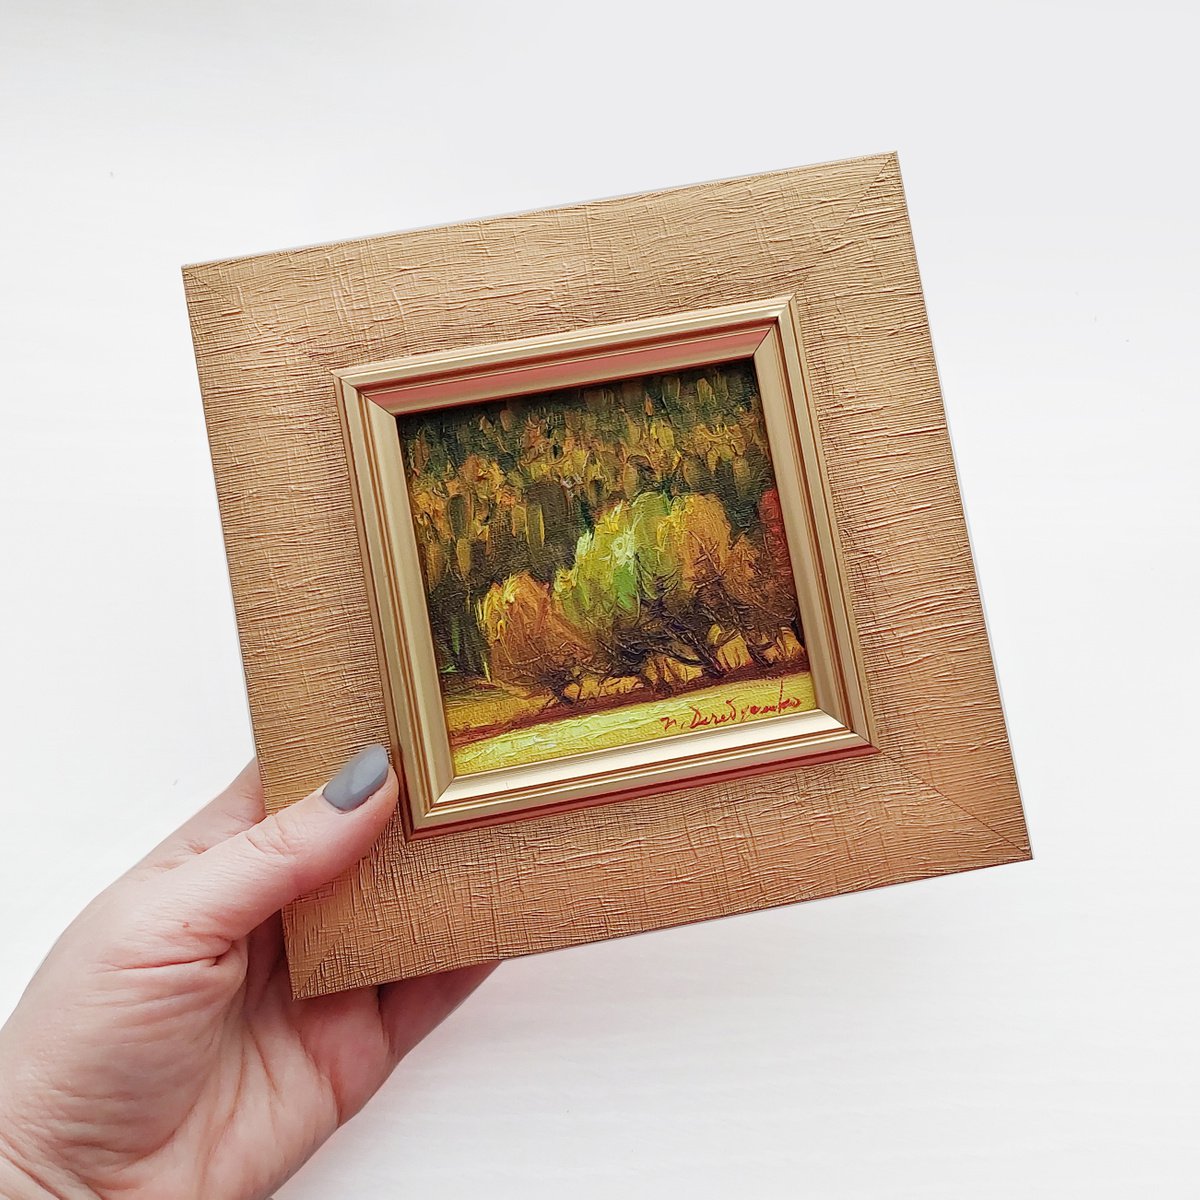 Trees oil painting original canvas board art 4x4, Small frame art landscape mini wall deco... by Nataly Derevyanko